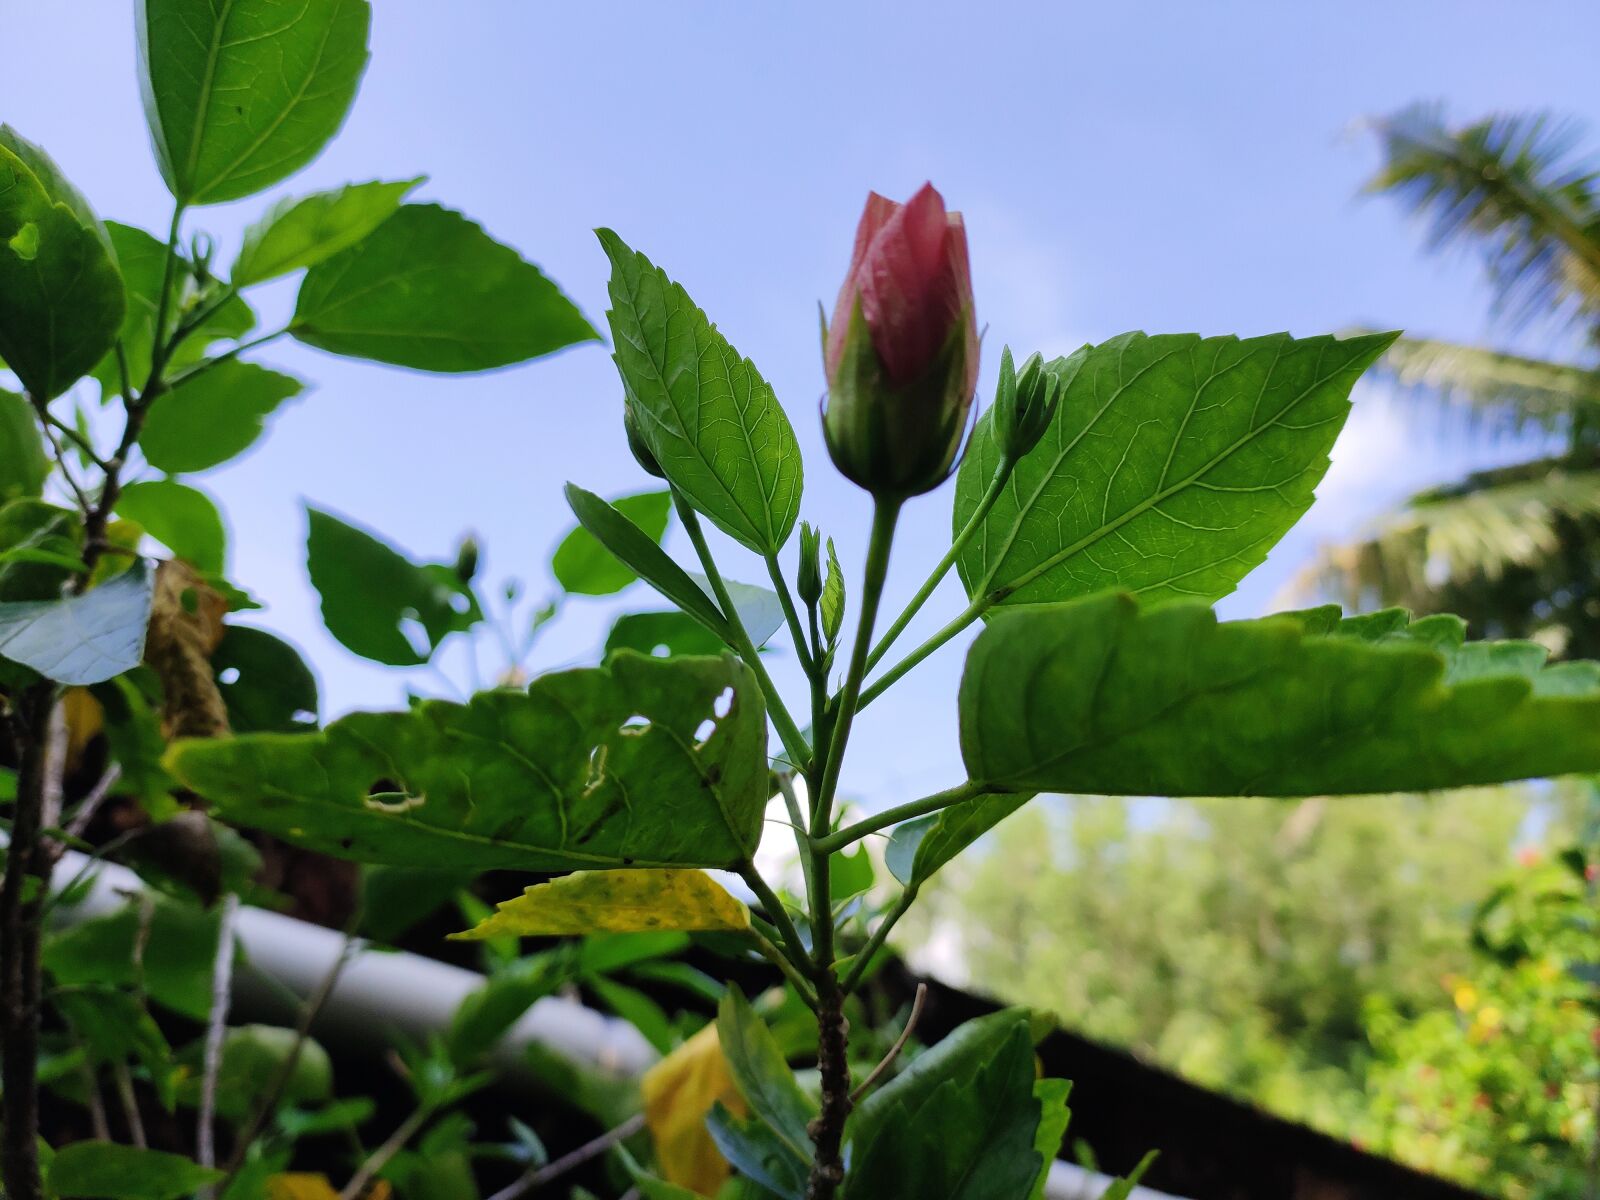 Xiaomi Redmi Note 7 Pro sample photo. Flower, sky, nature photography